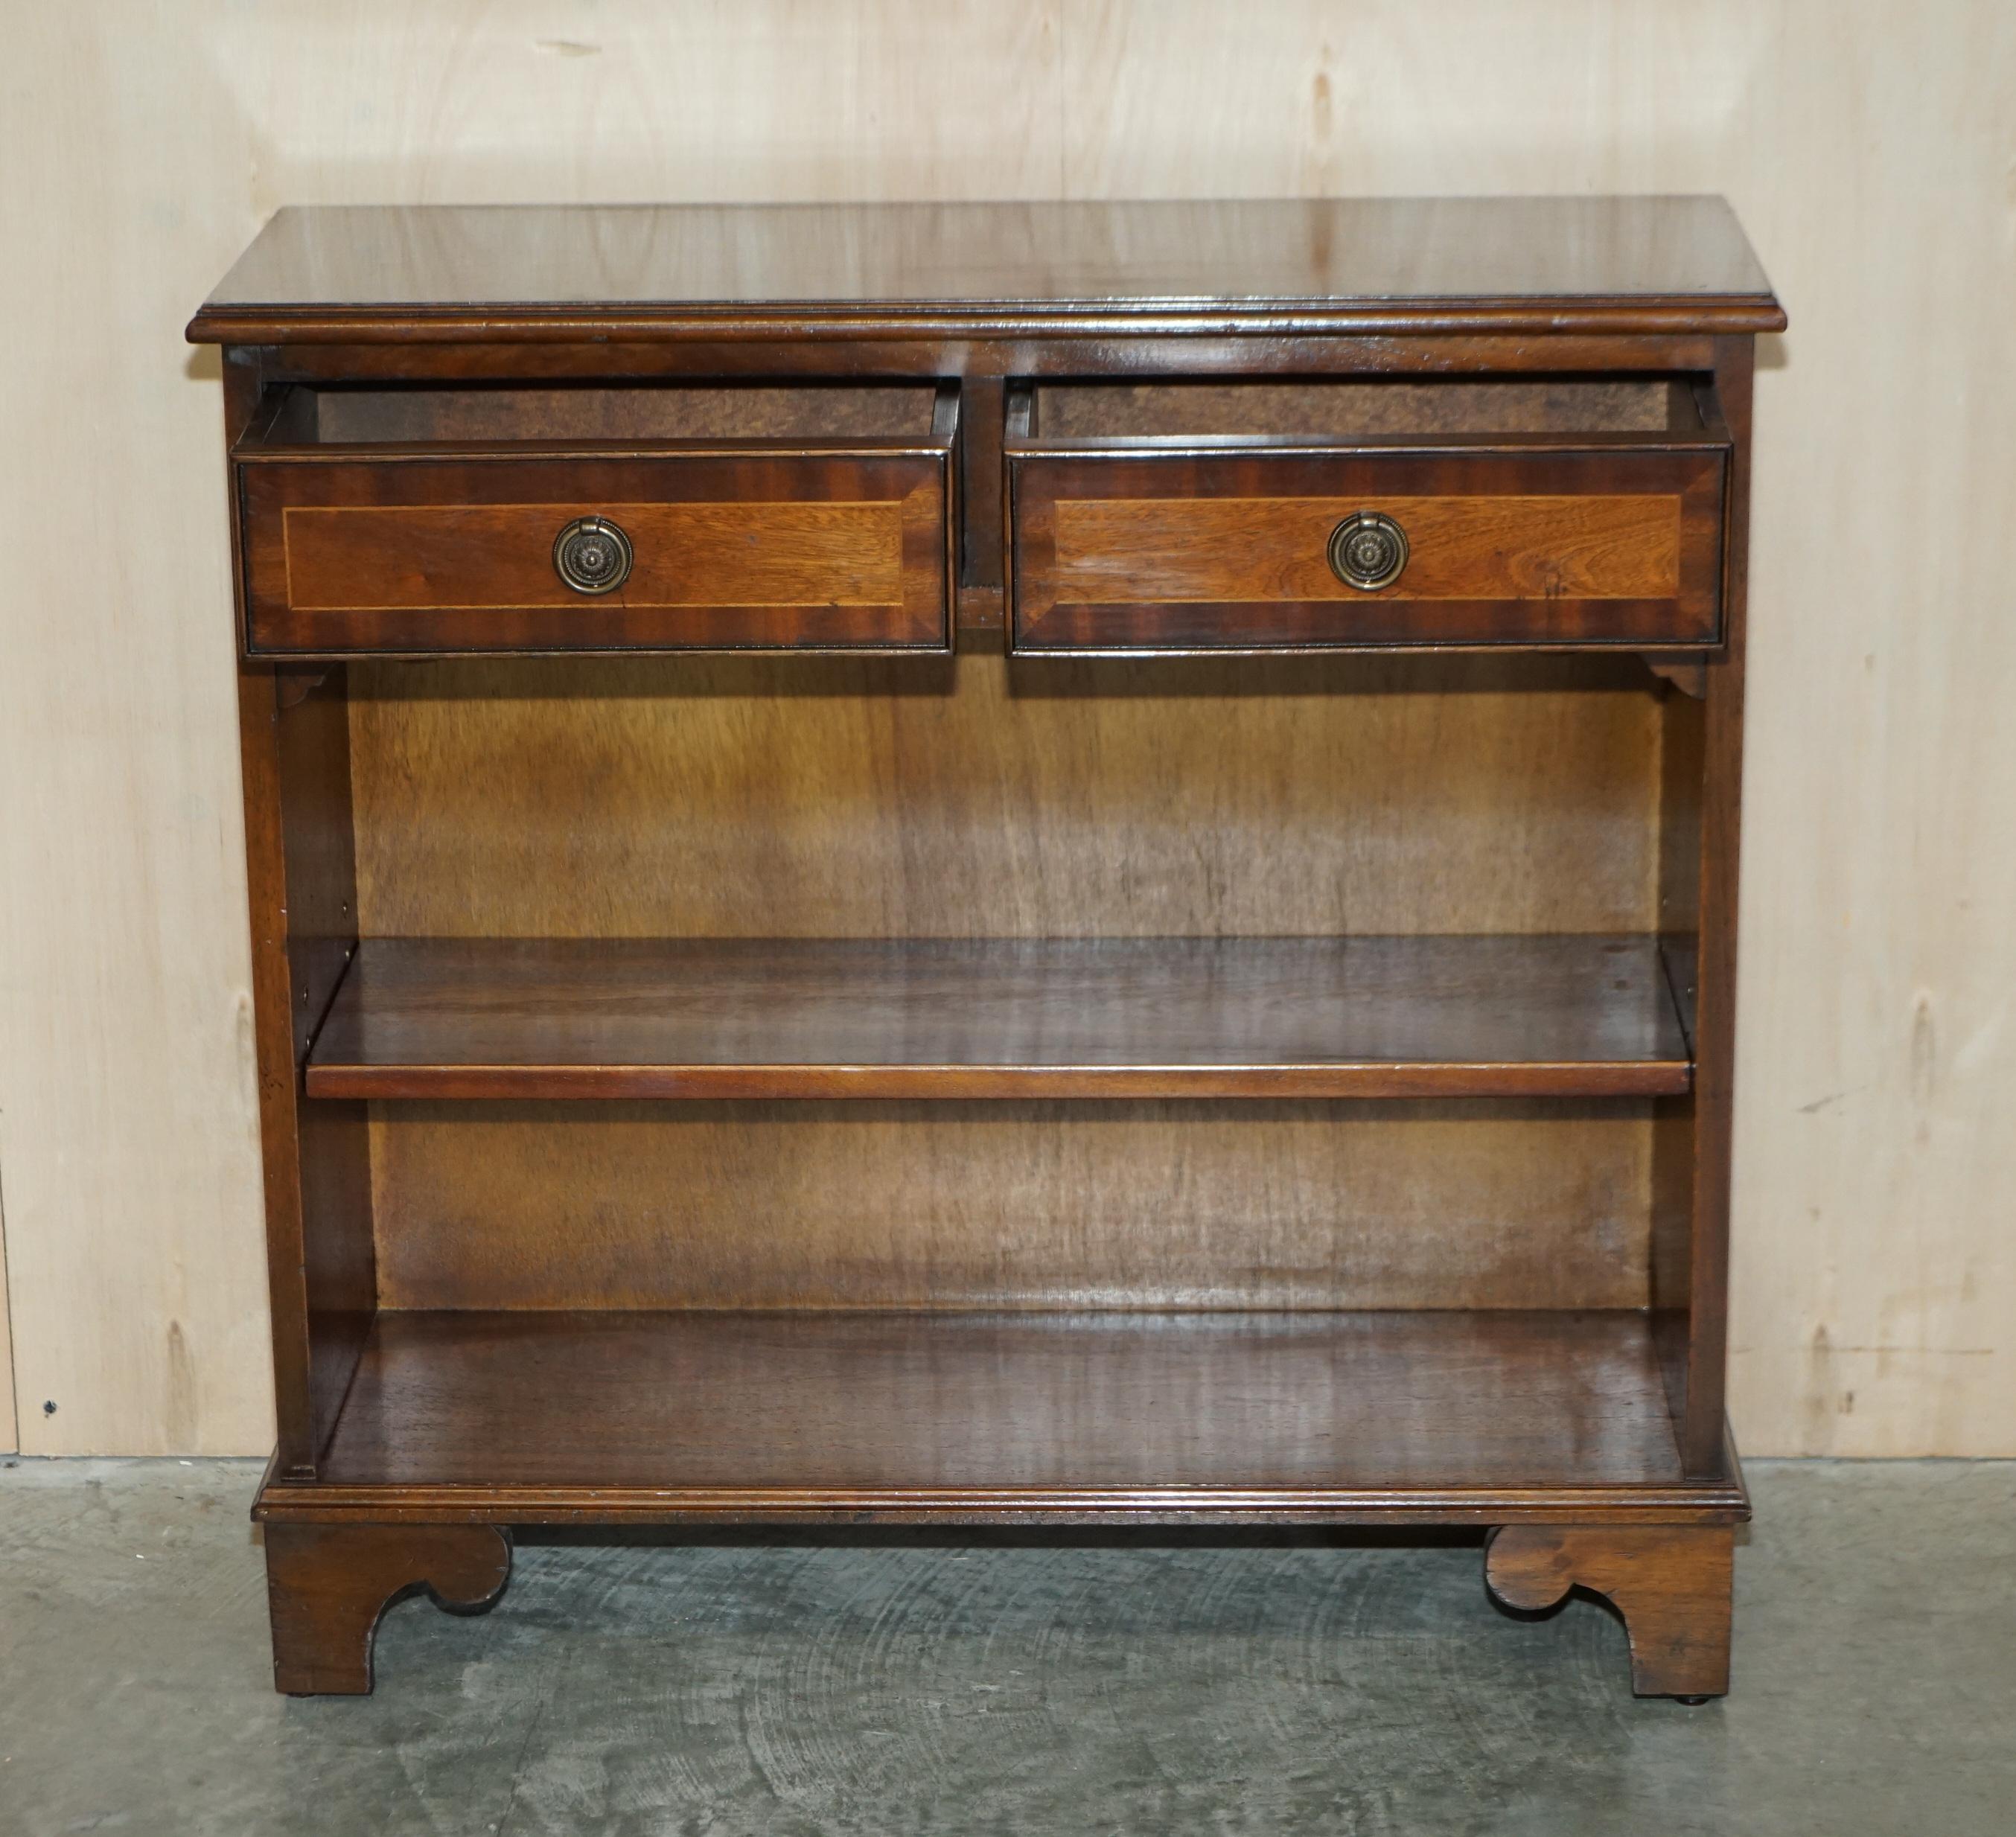 Vintage Two Drawer Bevan Funnell Flamed Hardwood Dwarf Open Library Bookcase For Sale 9